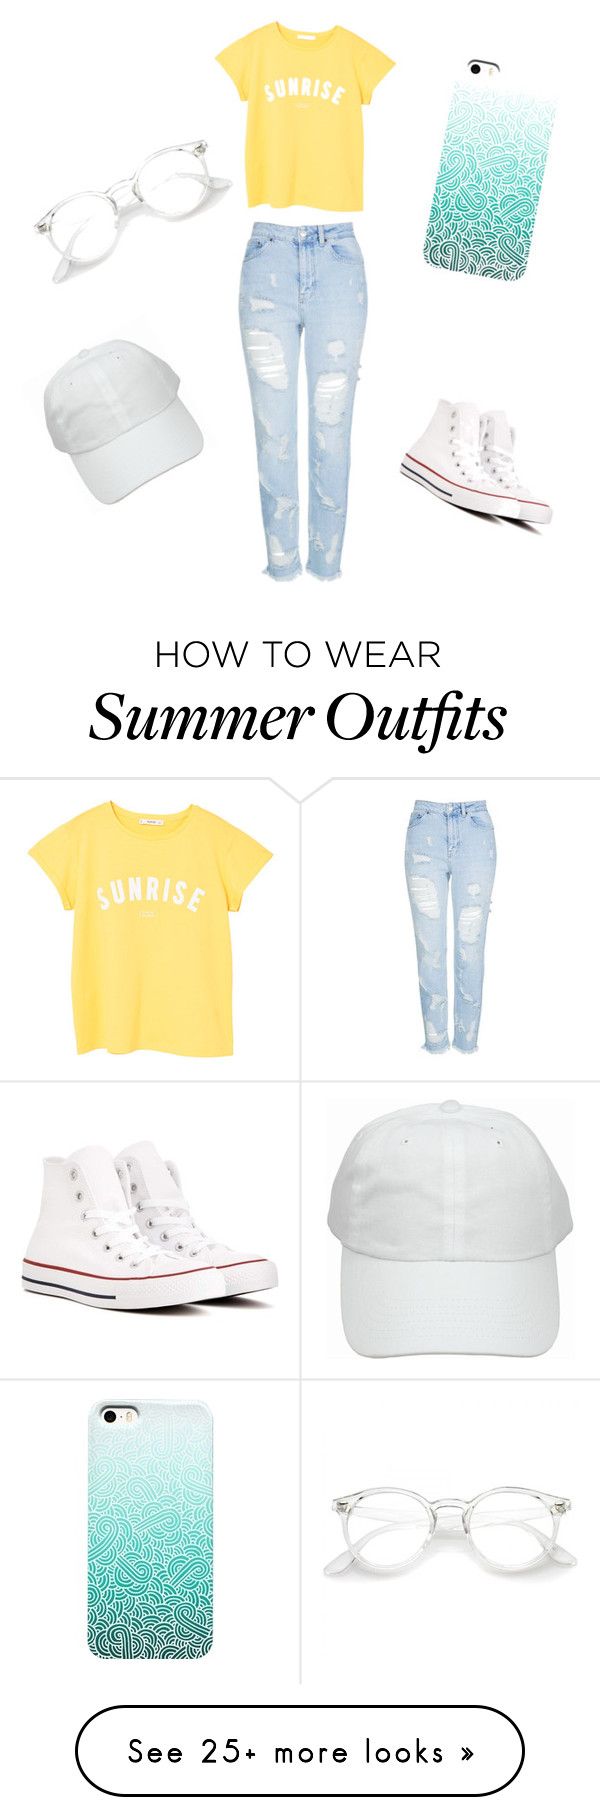 "Basic summer outfit ✨" by stephk104 on Polyvore featuring MANGO, To...